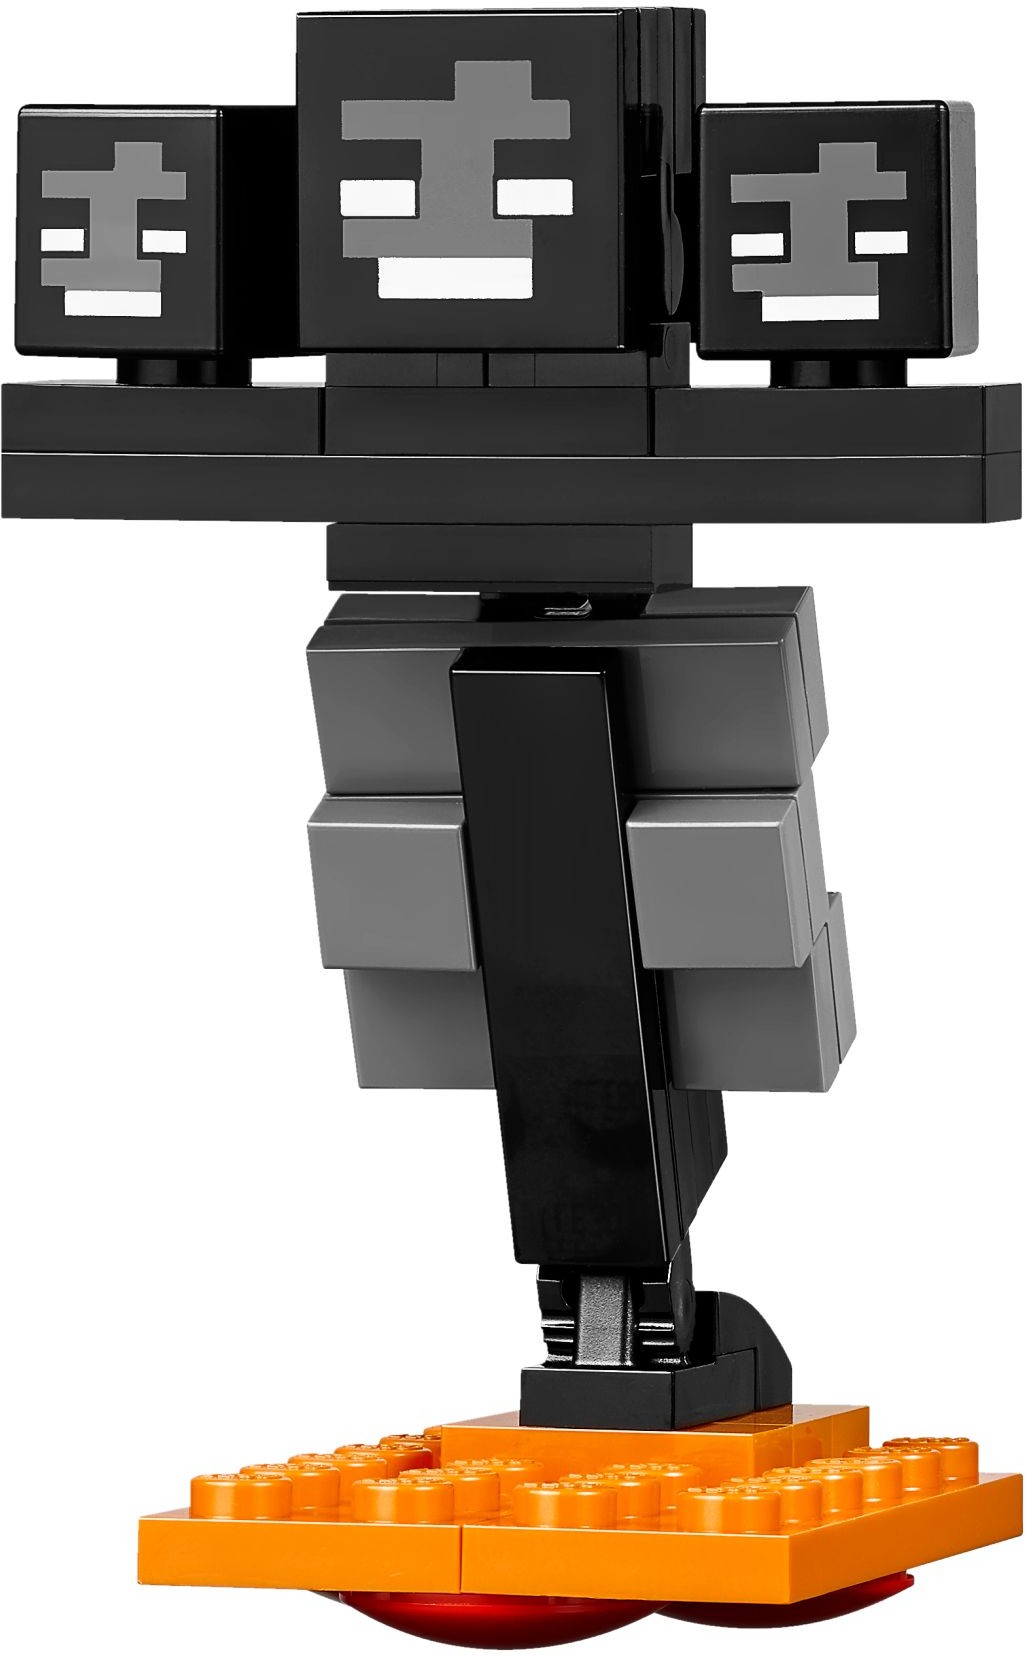 LEGO Minecraft Wither (Minifig Scale), See how to build it:…